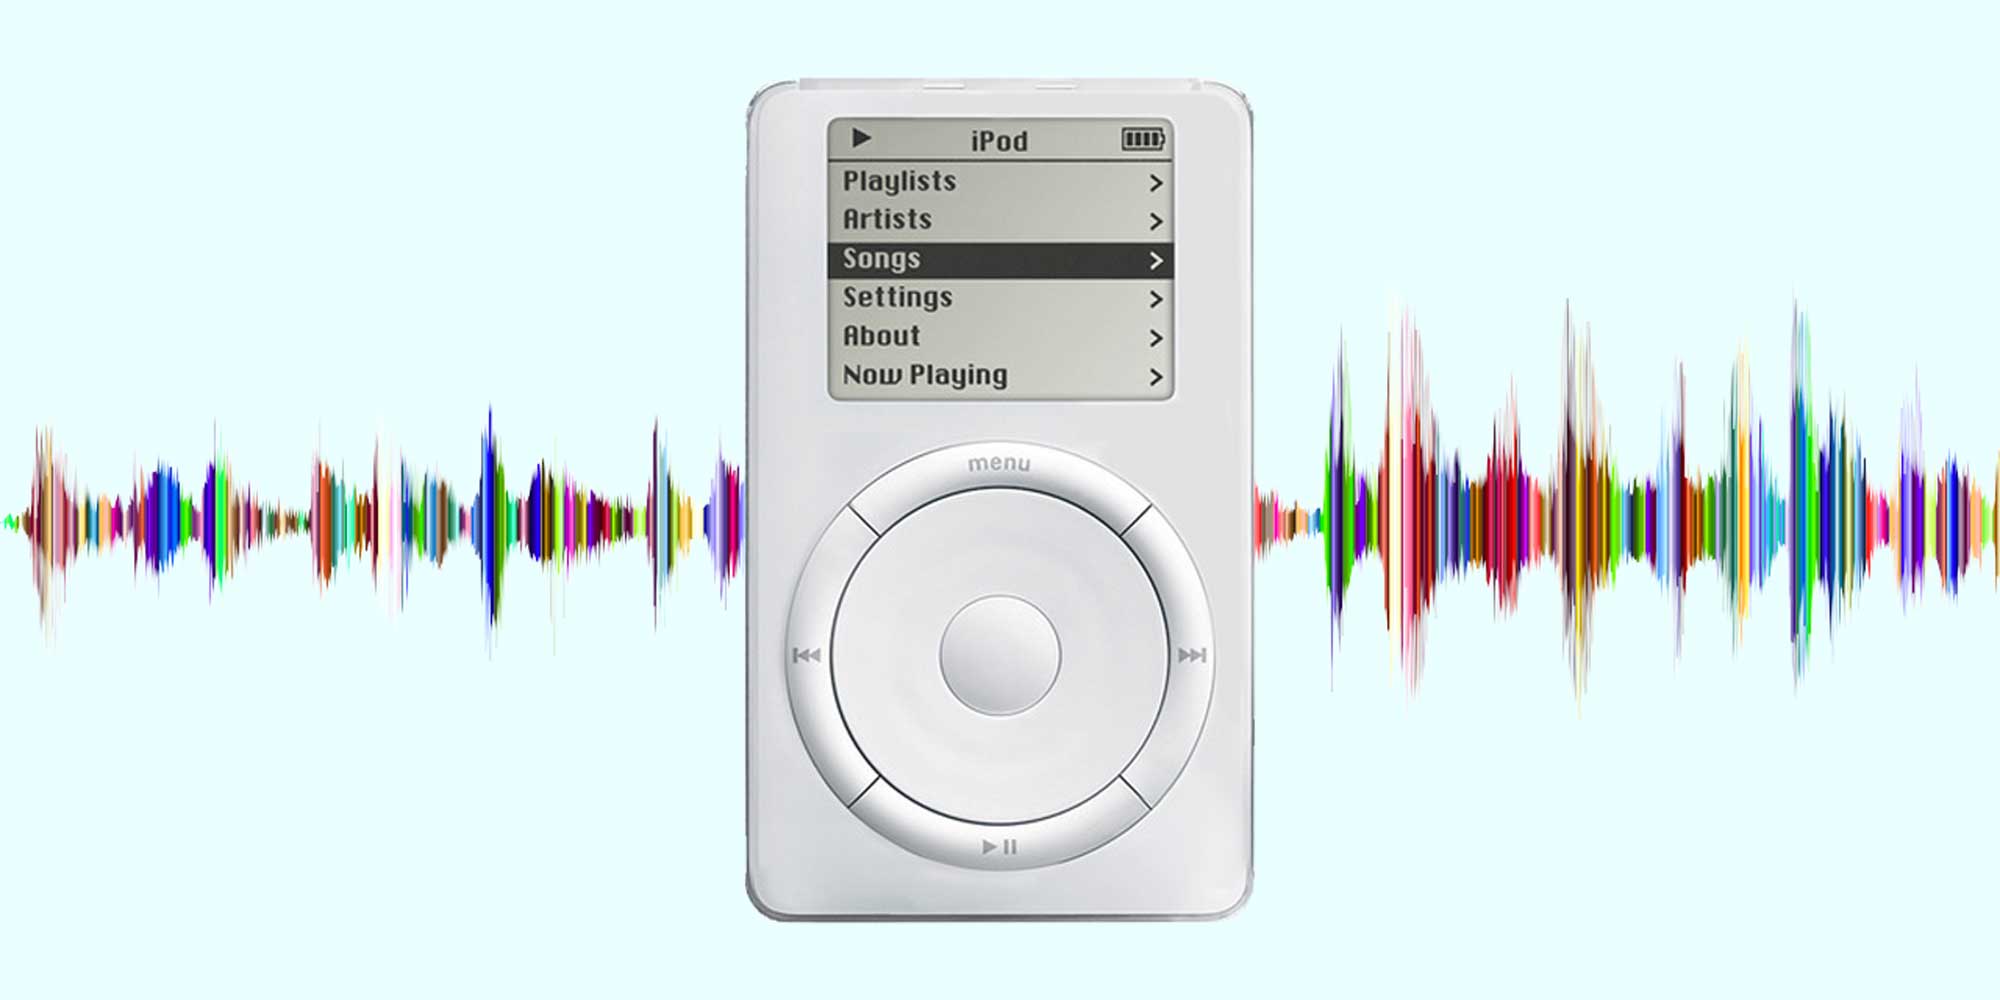 How To Remove the European iPod Volume Limit